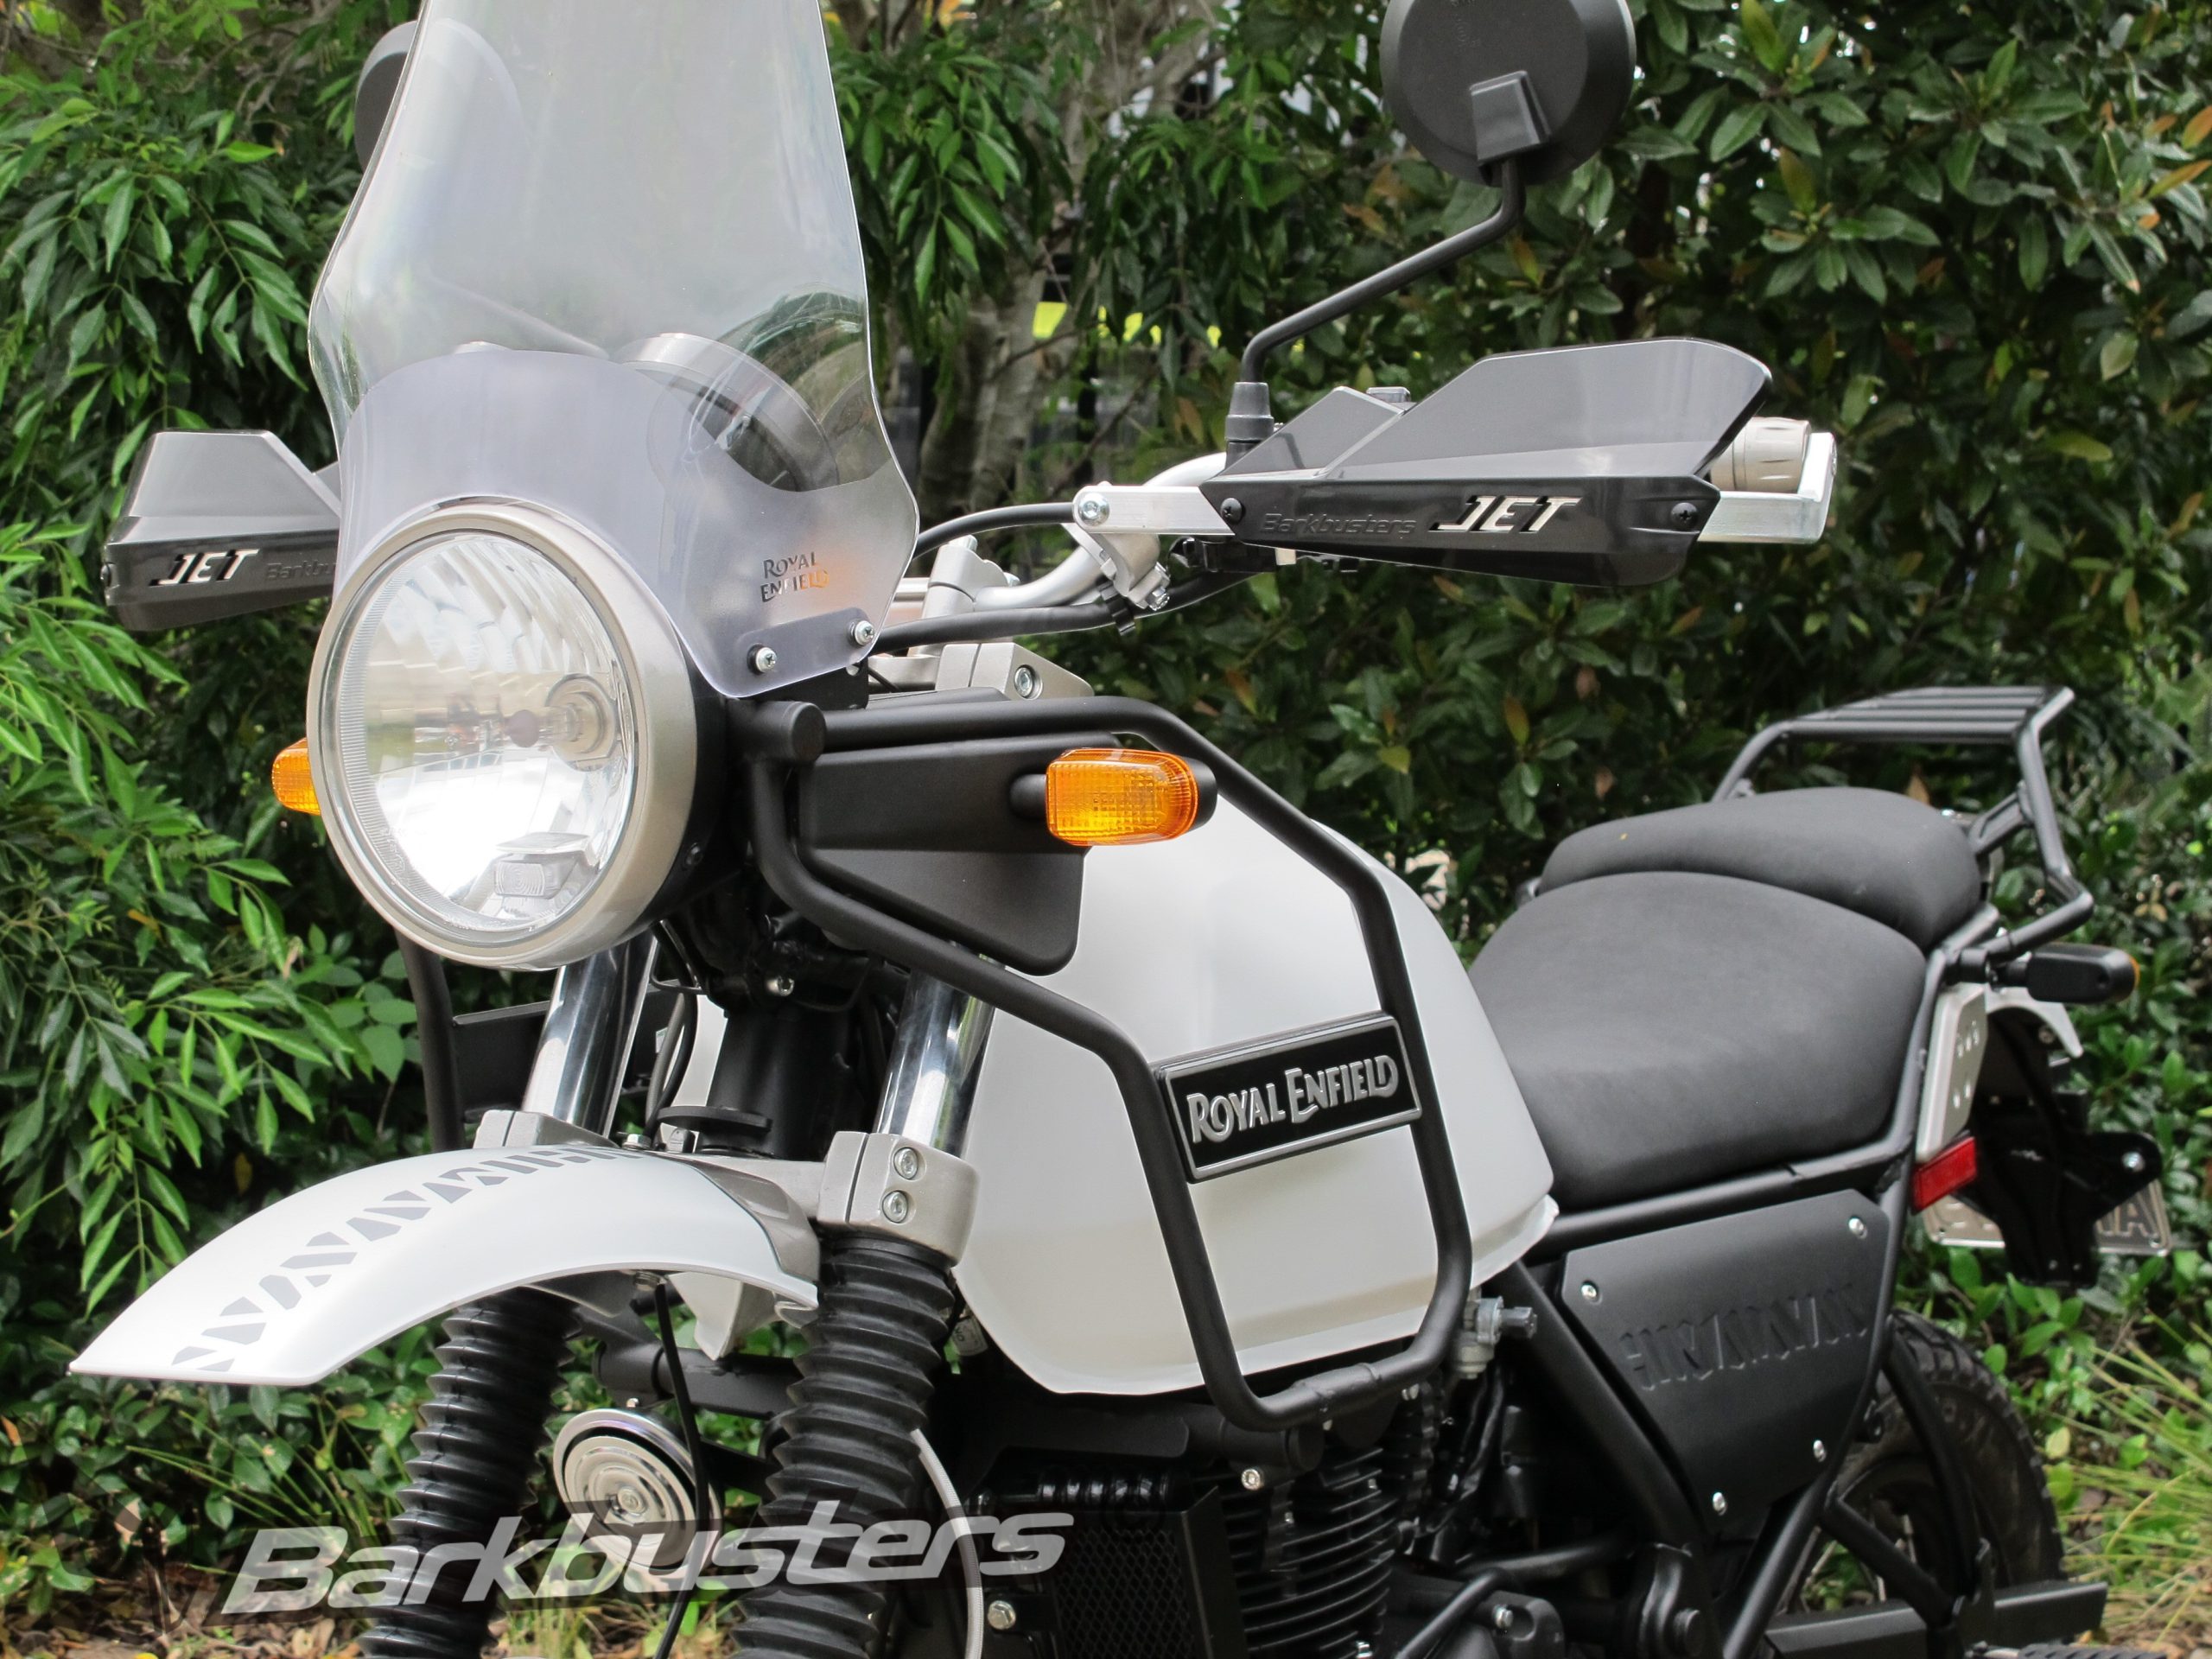 BARKBUSTERS Handguard Hardware Kit (Code: BHG-084) fitted to ROYAL ENFIELD Himalayan with JET guards (Code: JET-003) sold separately